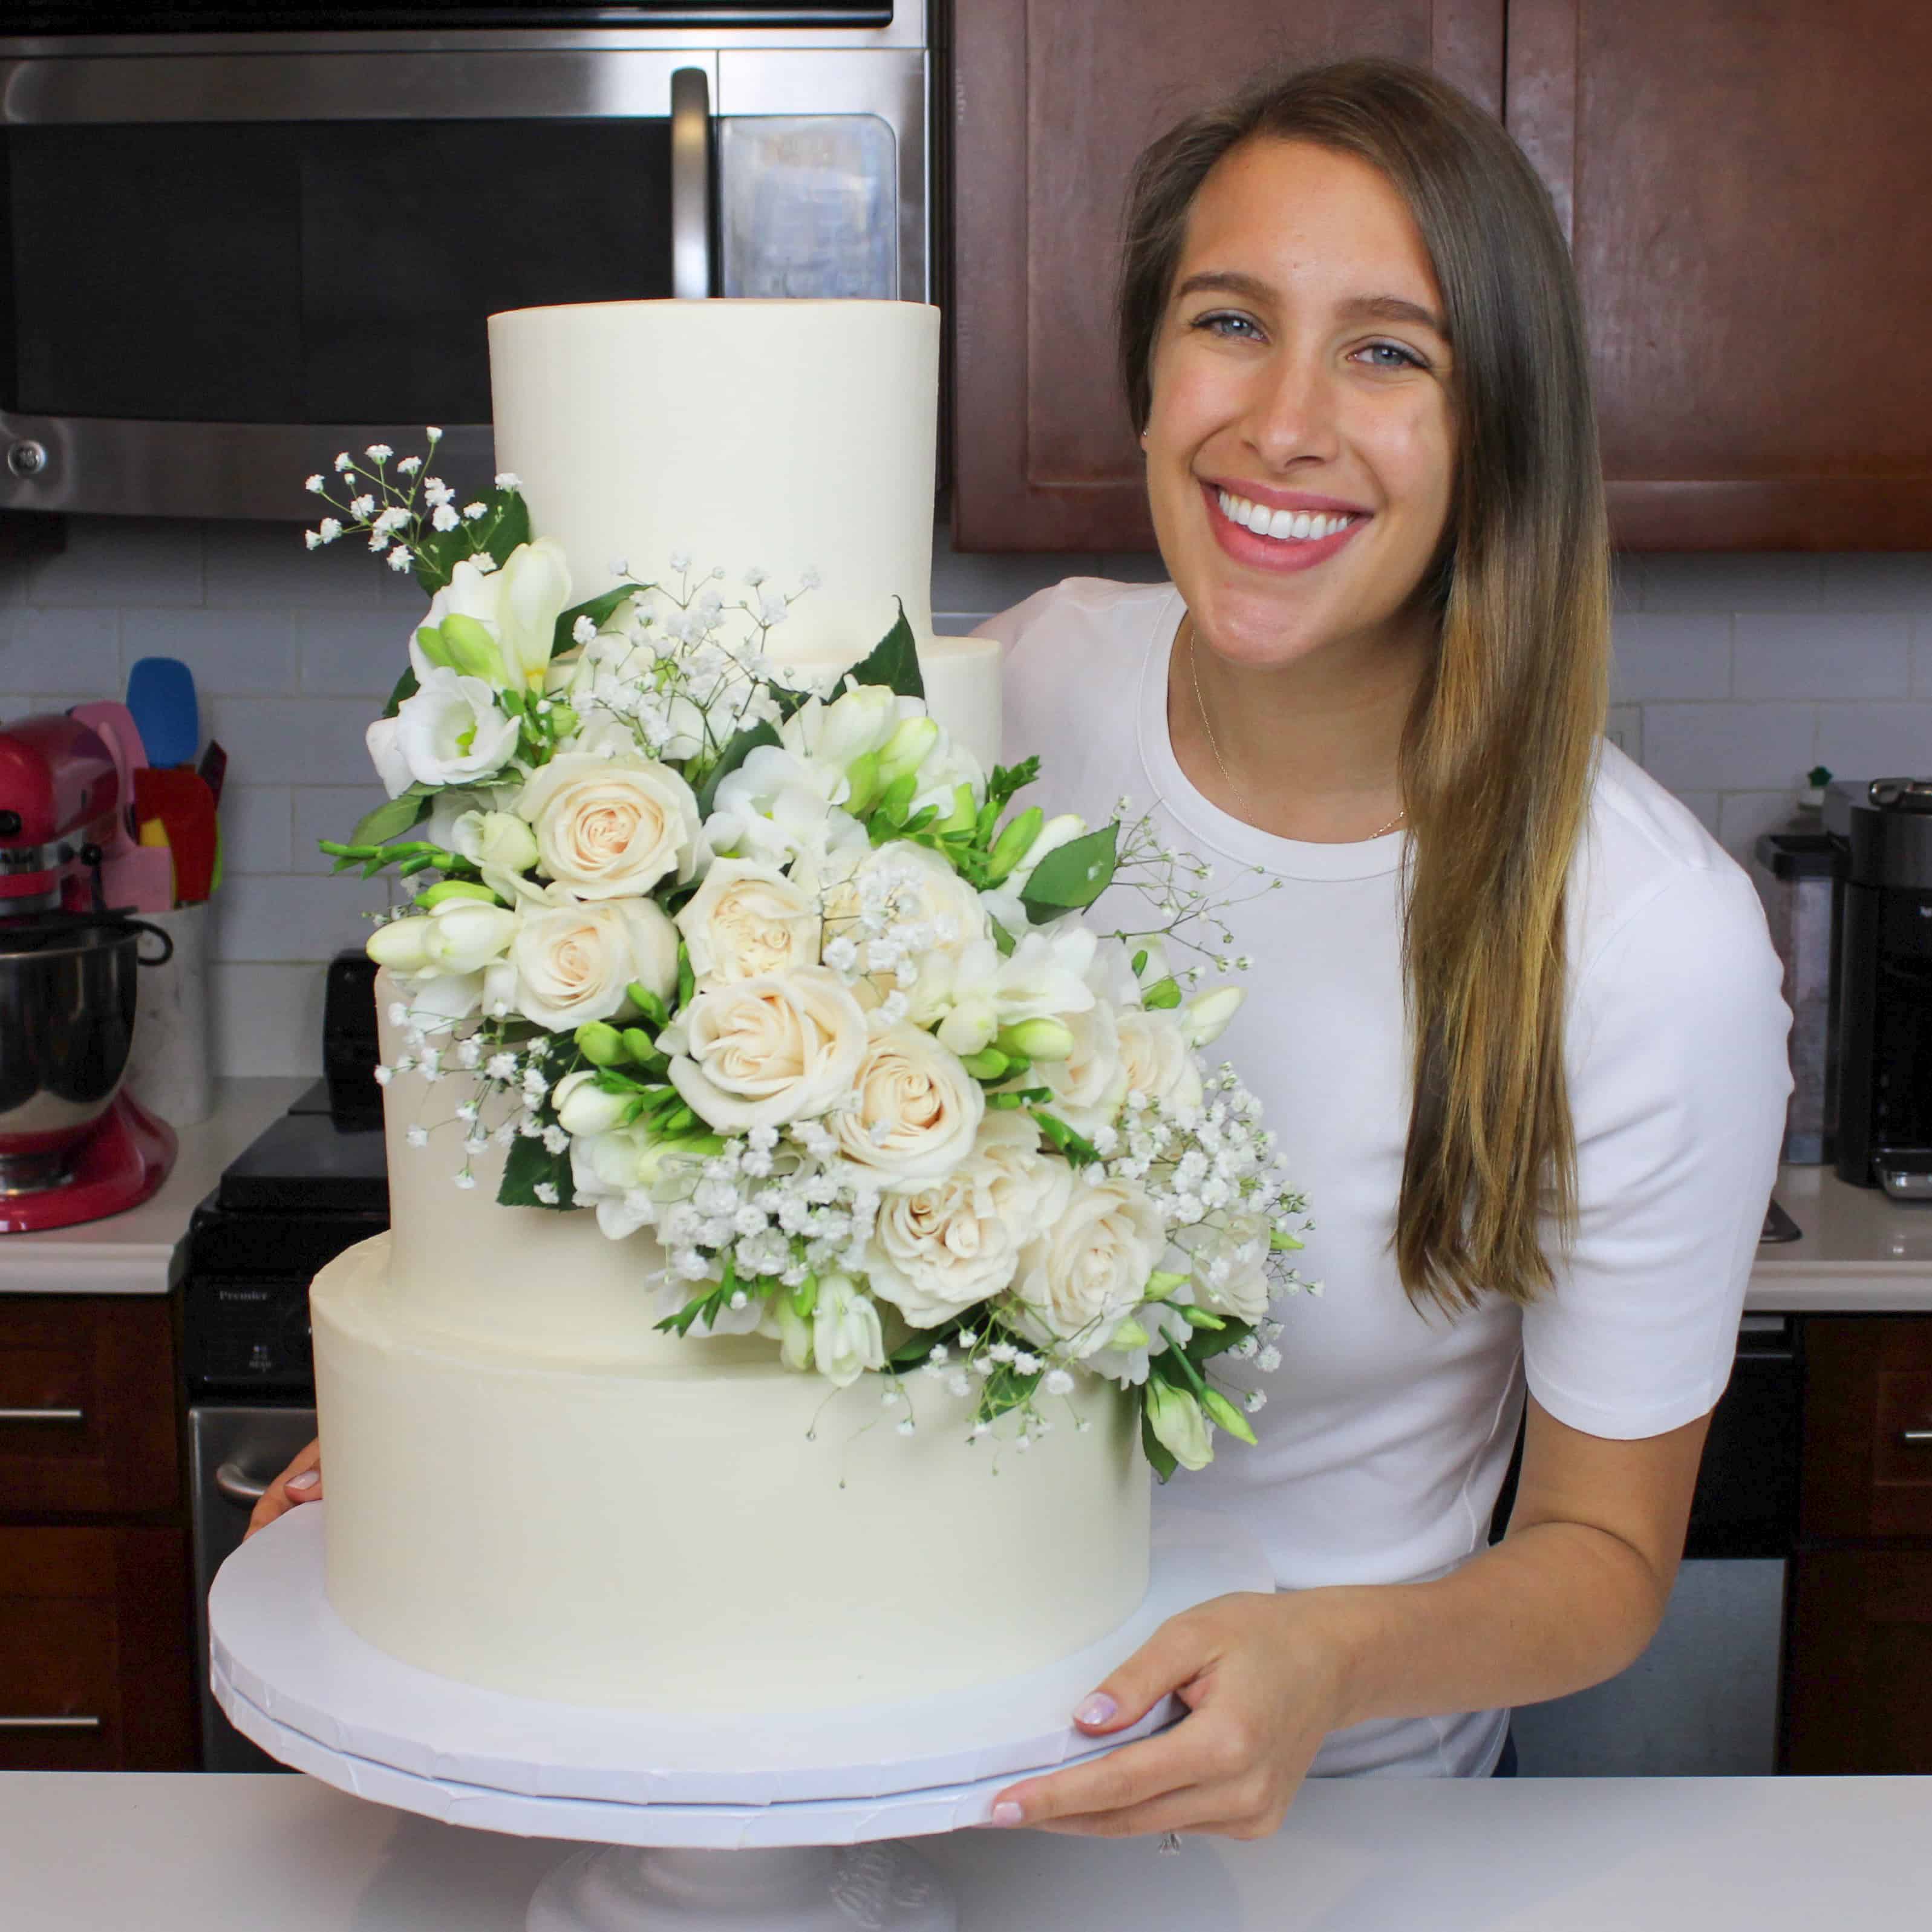 https://chelsweets.com/wp-content/uploads/2019/07/m-esmiling-with-wedding-cake.jpg